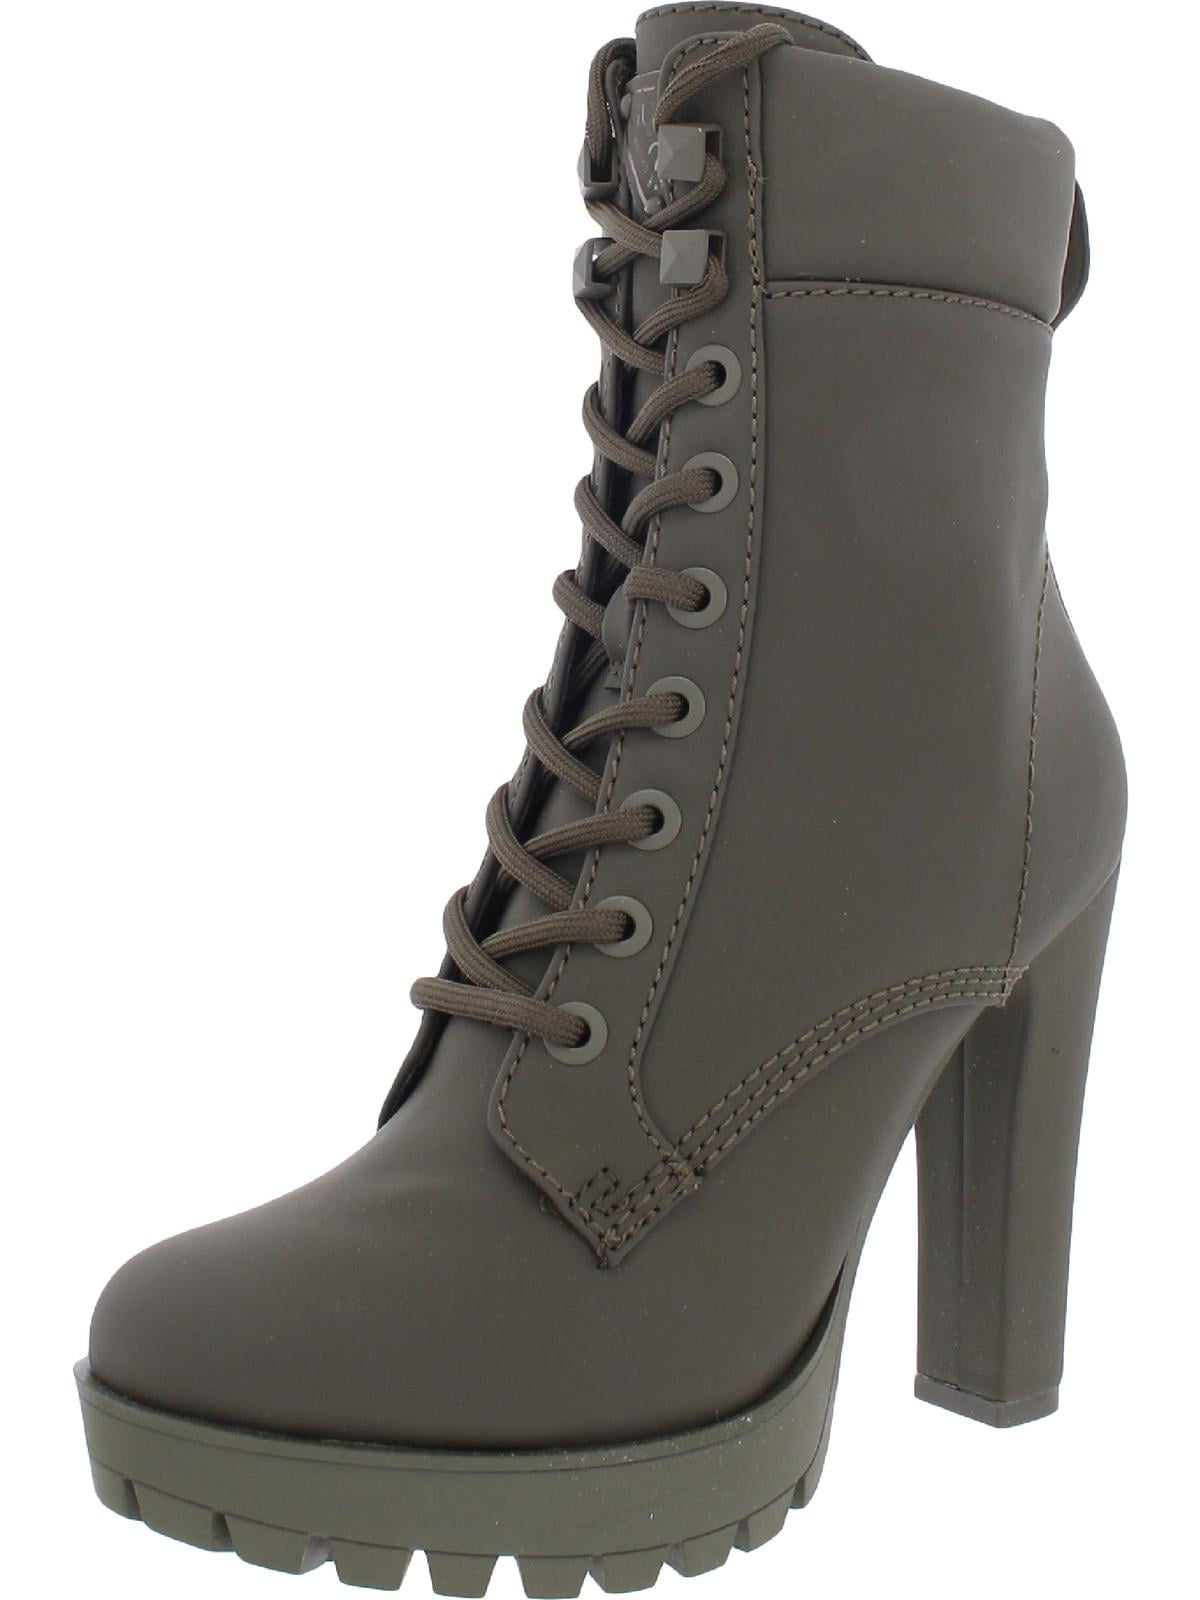 Guess Womens Tetia Faux Leather Platform Heels Combat & Lace-up Boots ...